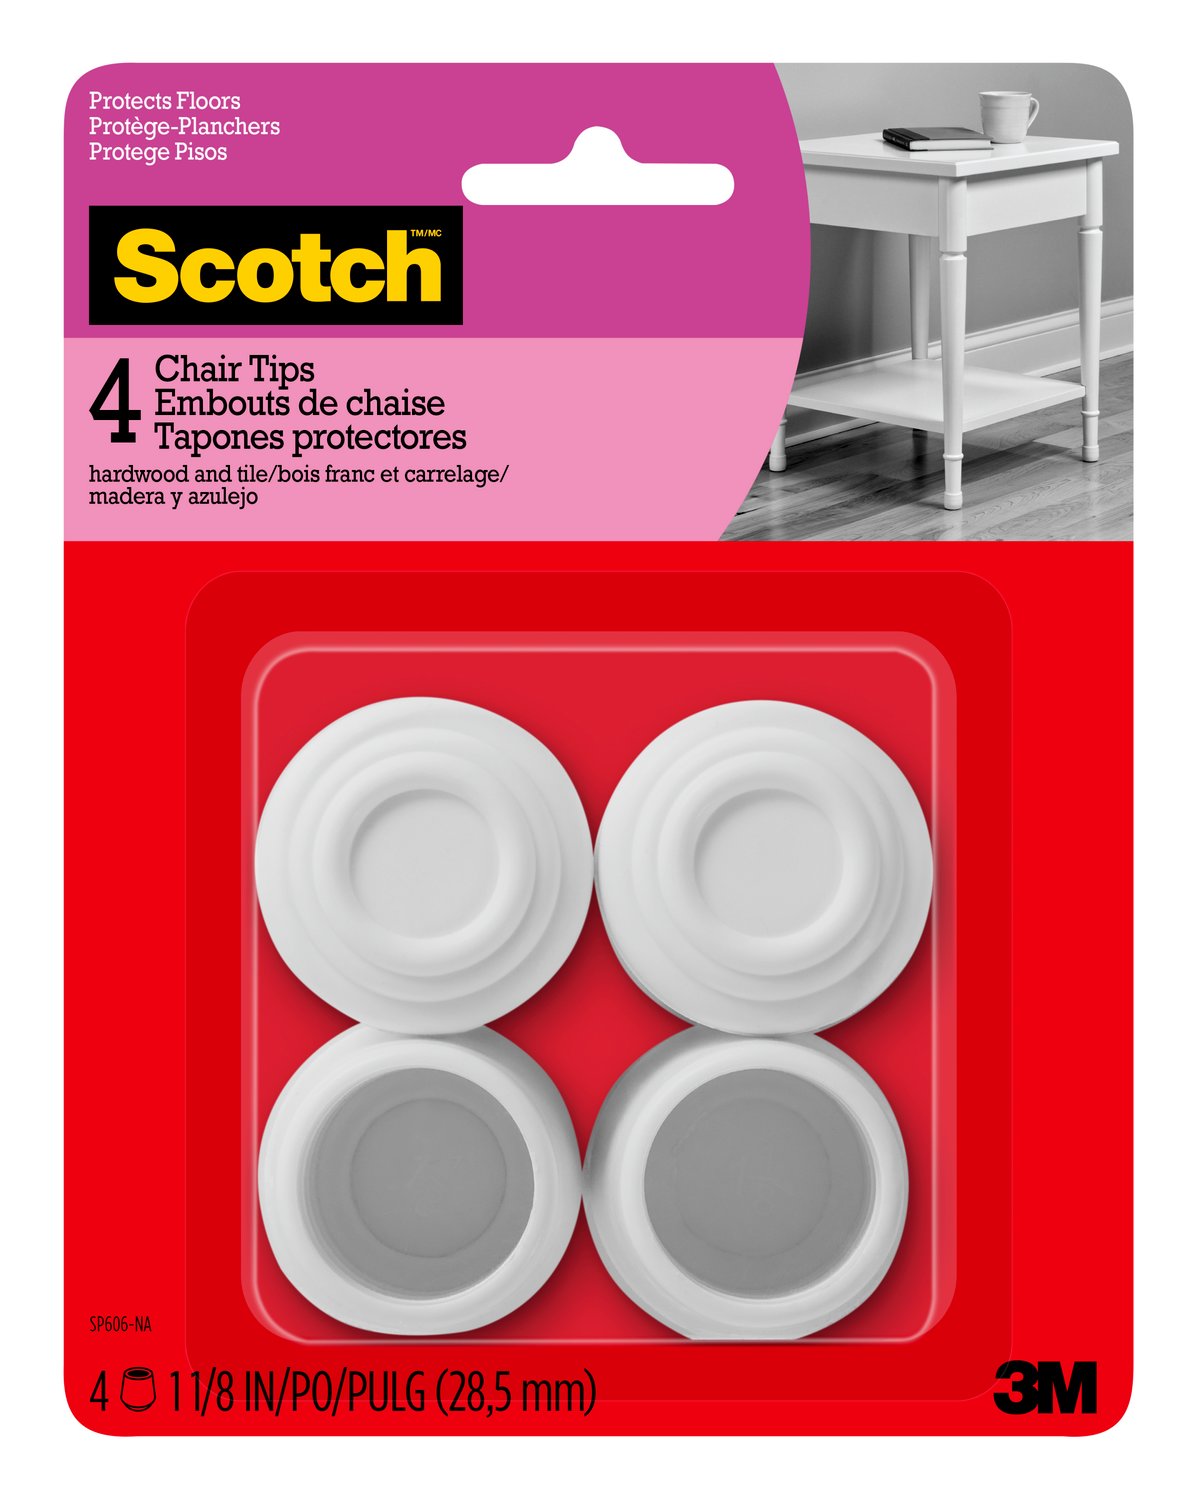 7100193955 - Scotch Chair Tips SP606-NA, White Rubber 1-1/8-In 4/Pk